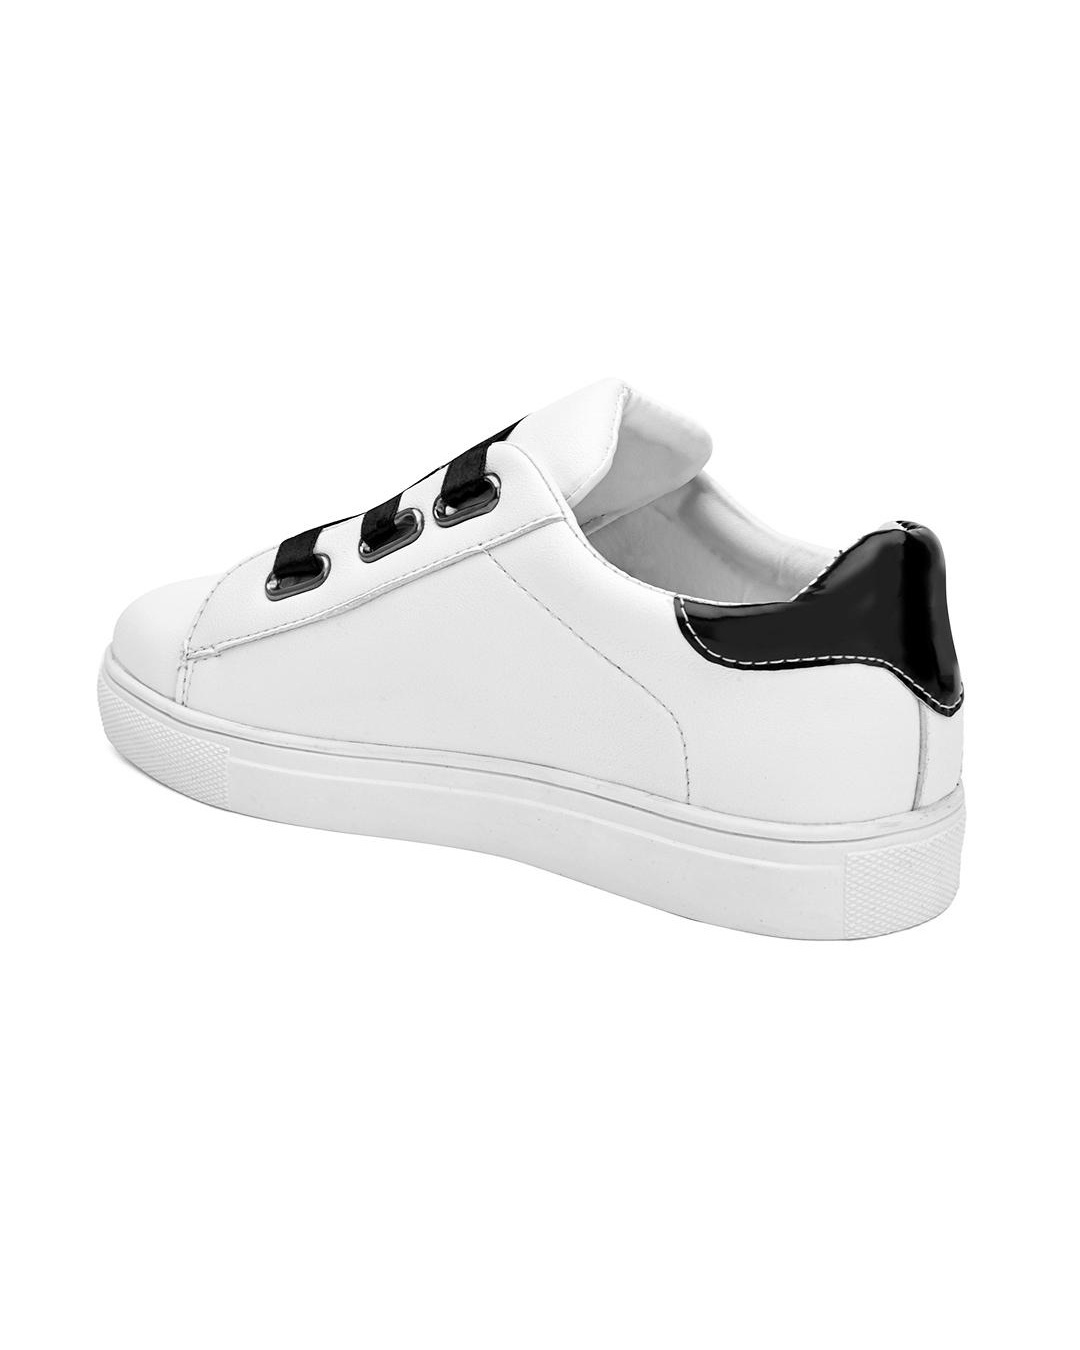 Buy Women's White and Black Color Block Casual Shoes Online in India at ...